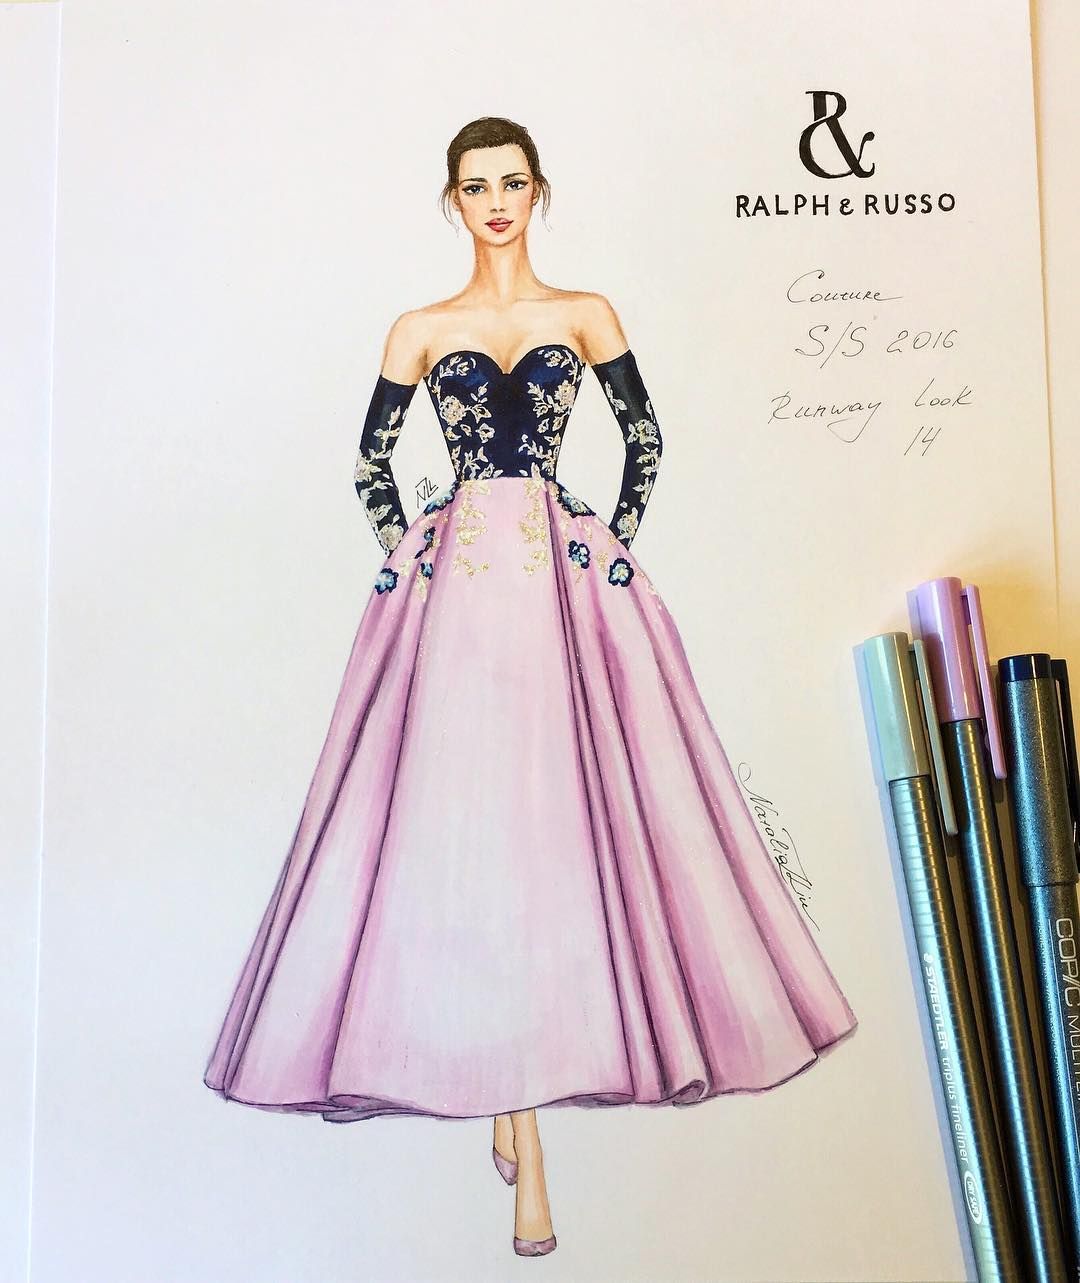 How To Draw Models For Fashion Designing